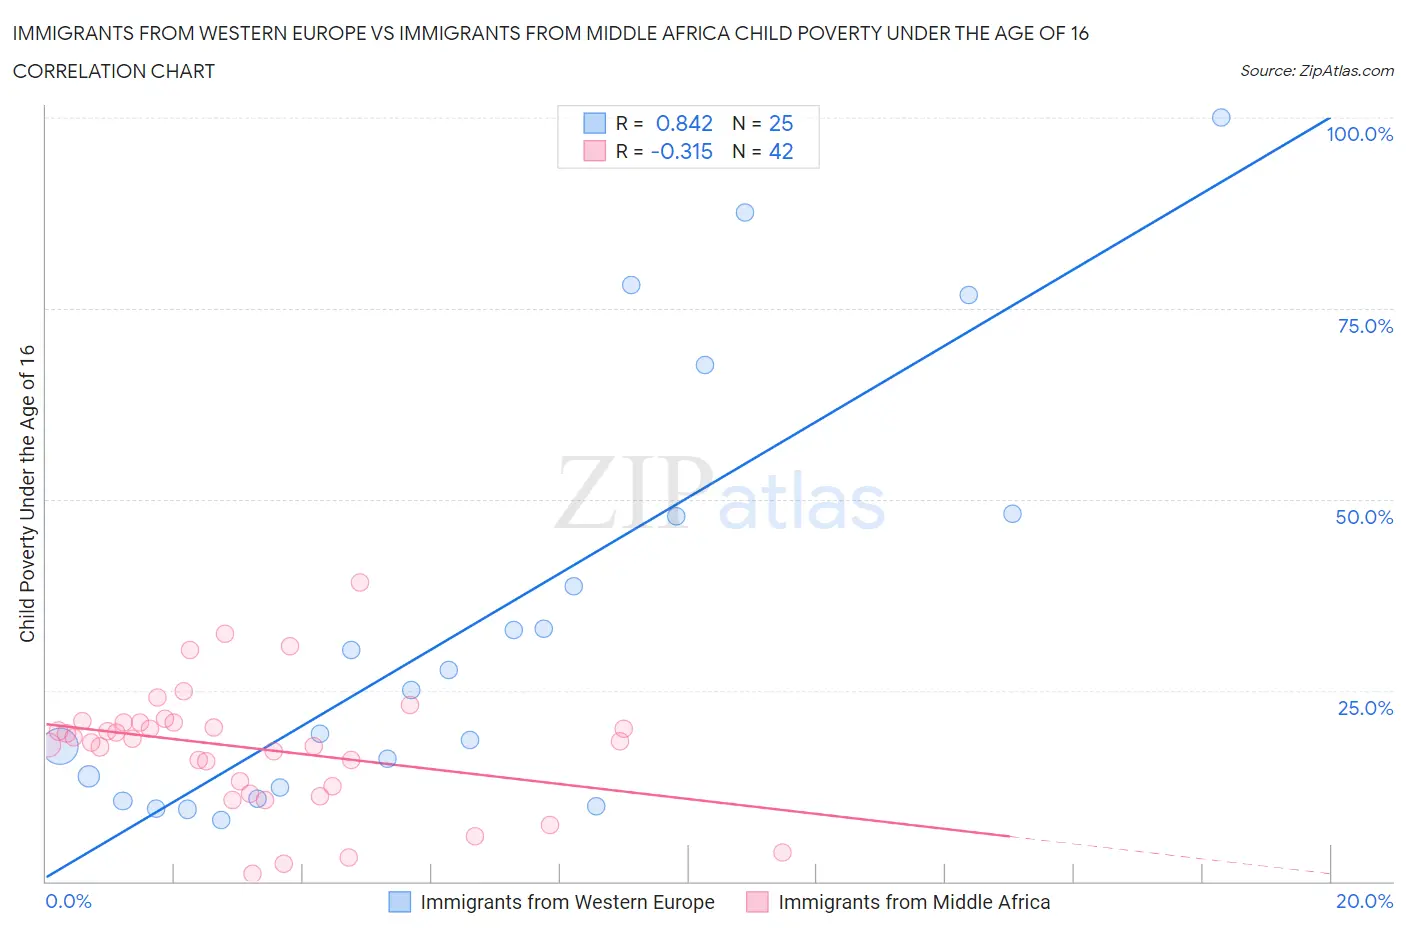 Immigrants from Western Europe vs Immigrants from Middle Africa Child Poverty Under the Age of 16